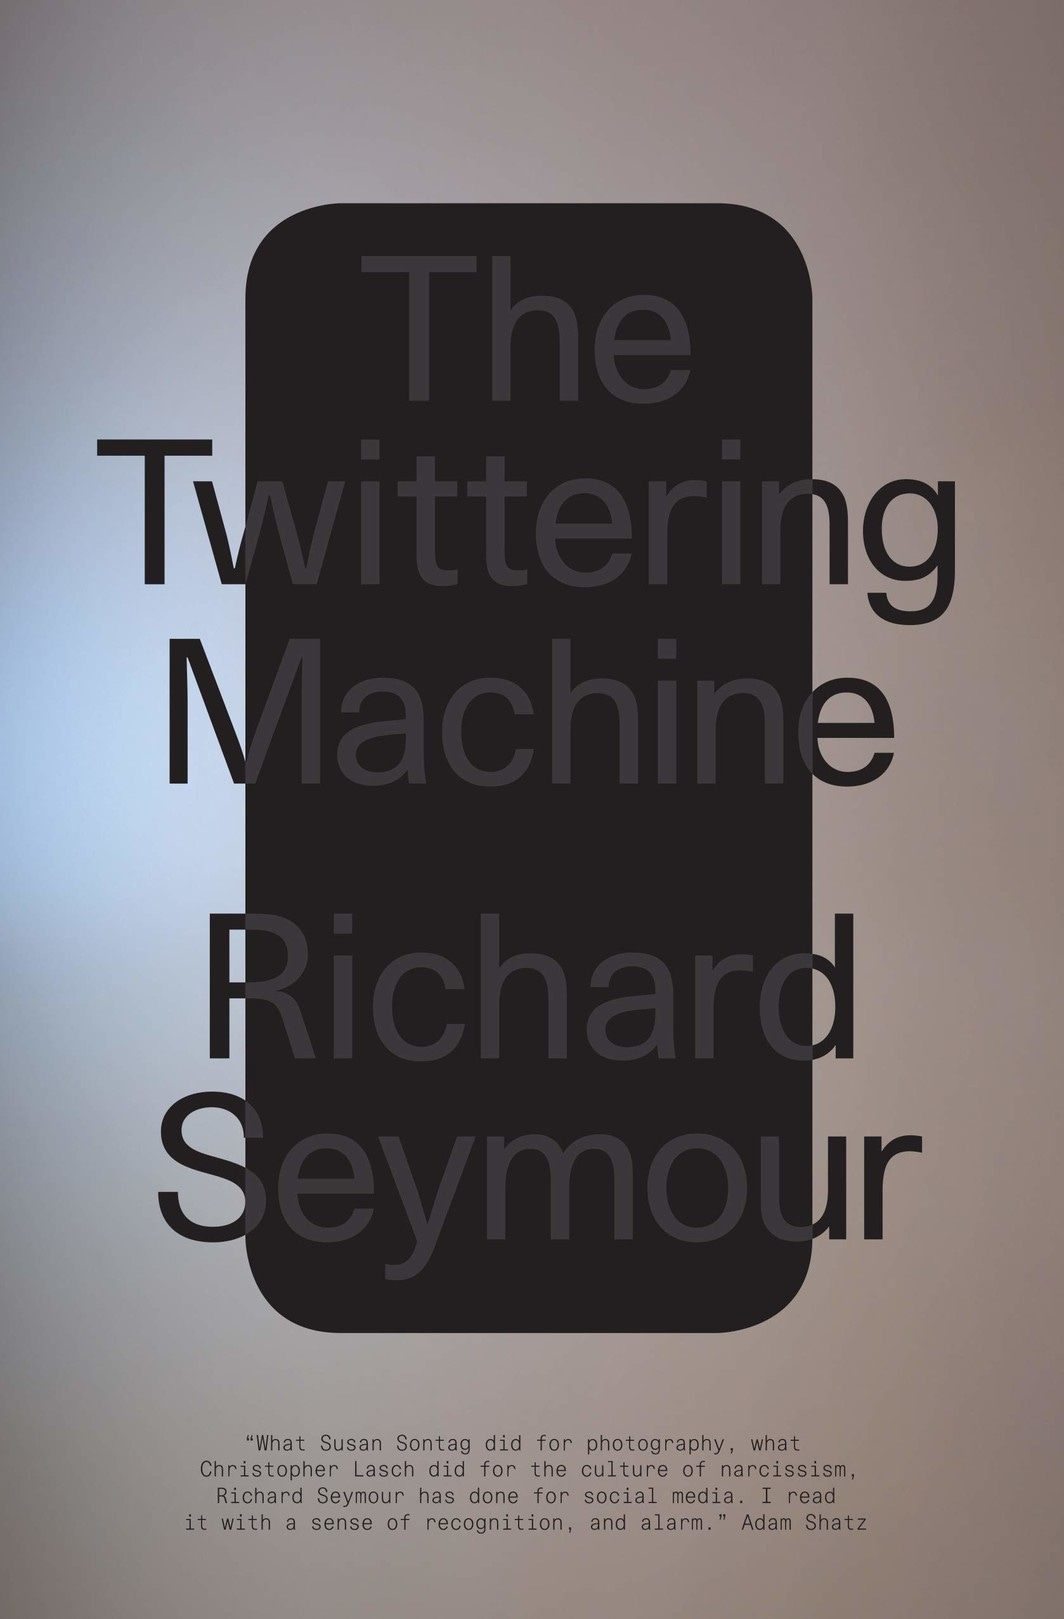 The cover of The Twittering Machine